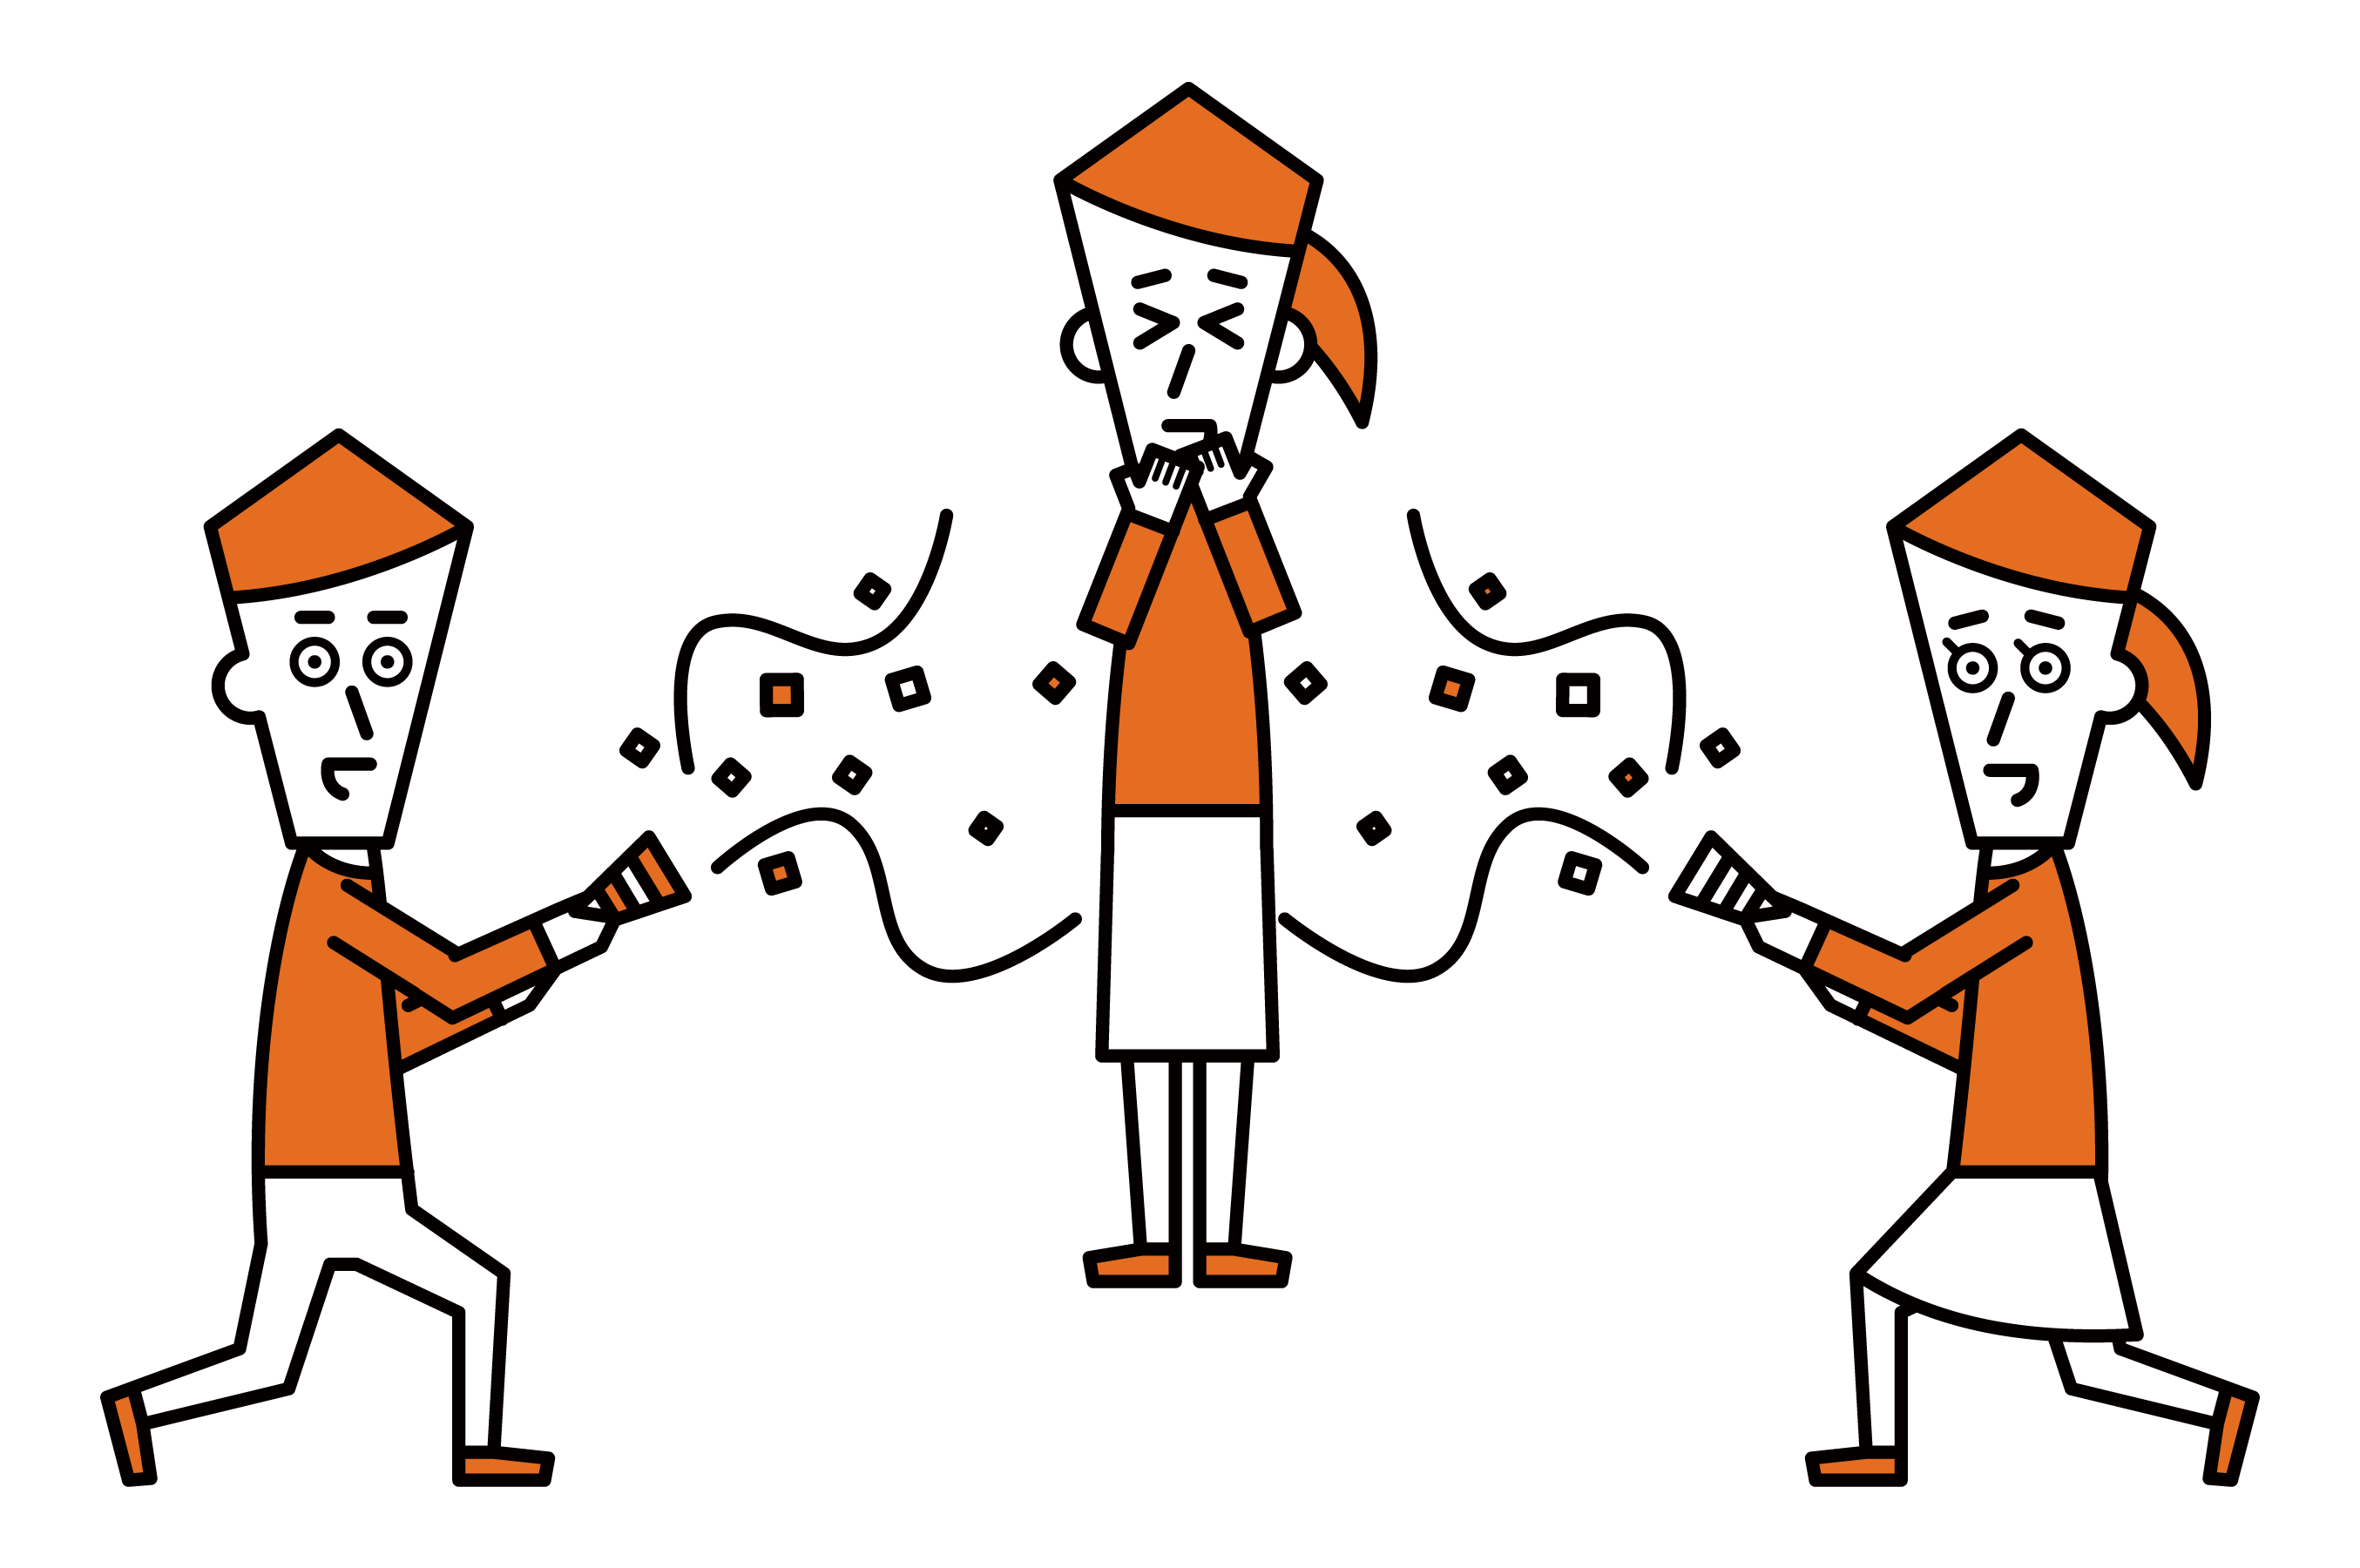 Illustration of people celebrating by sounding crackers